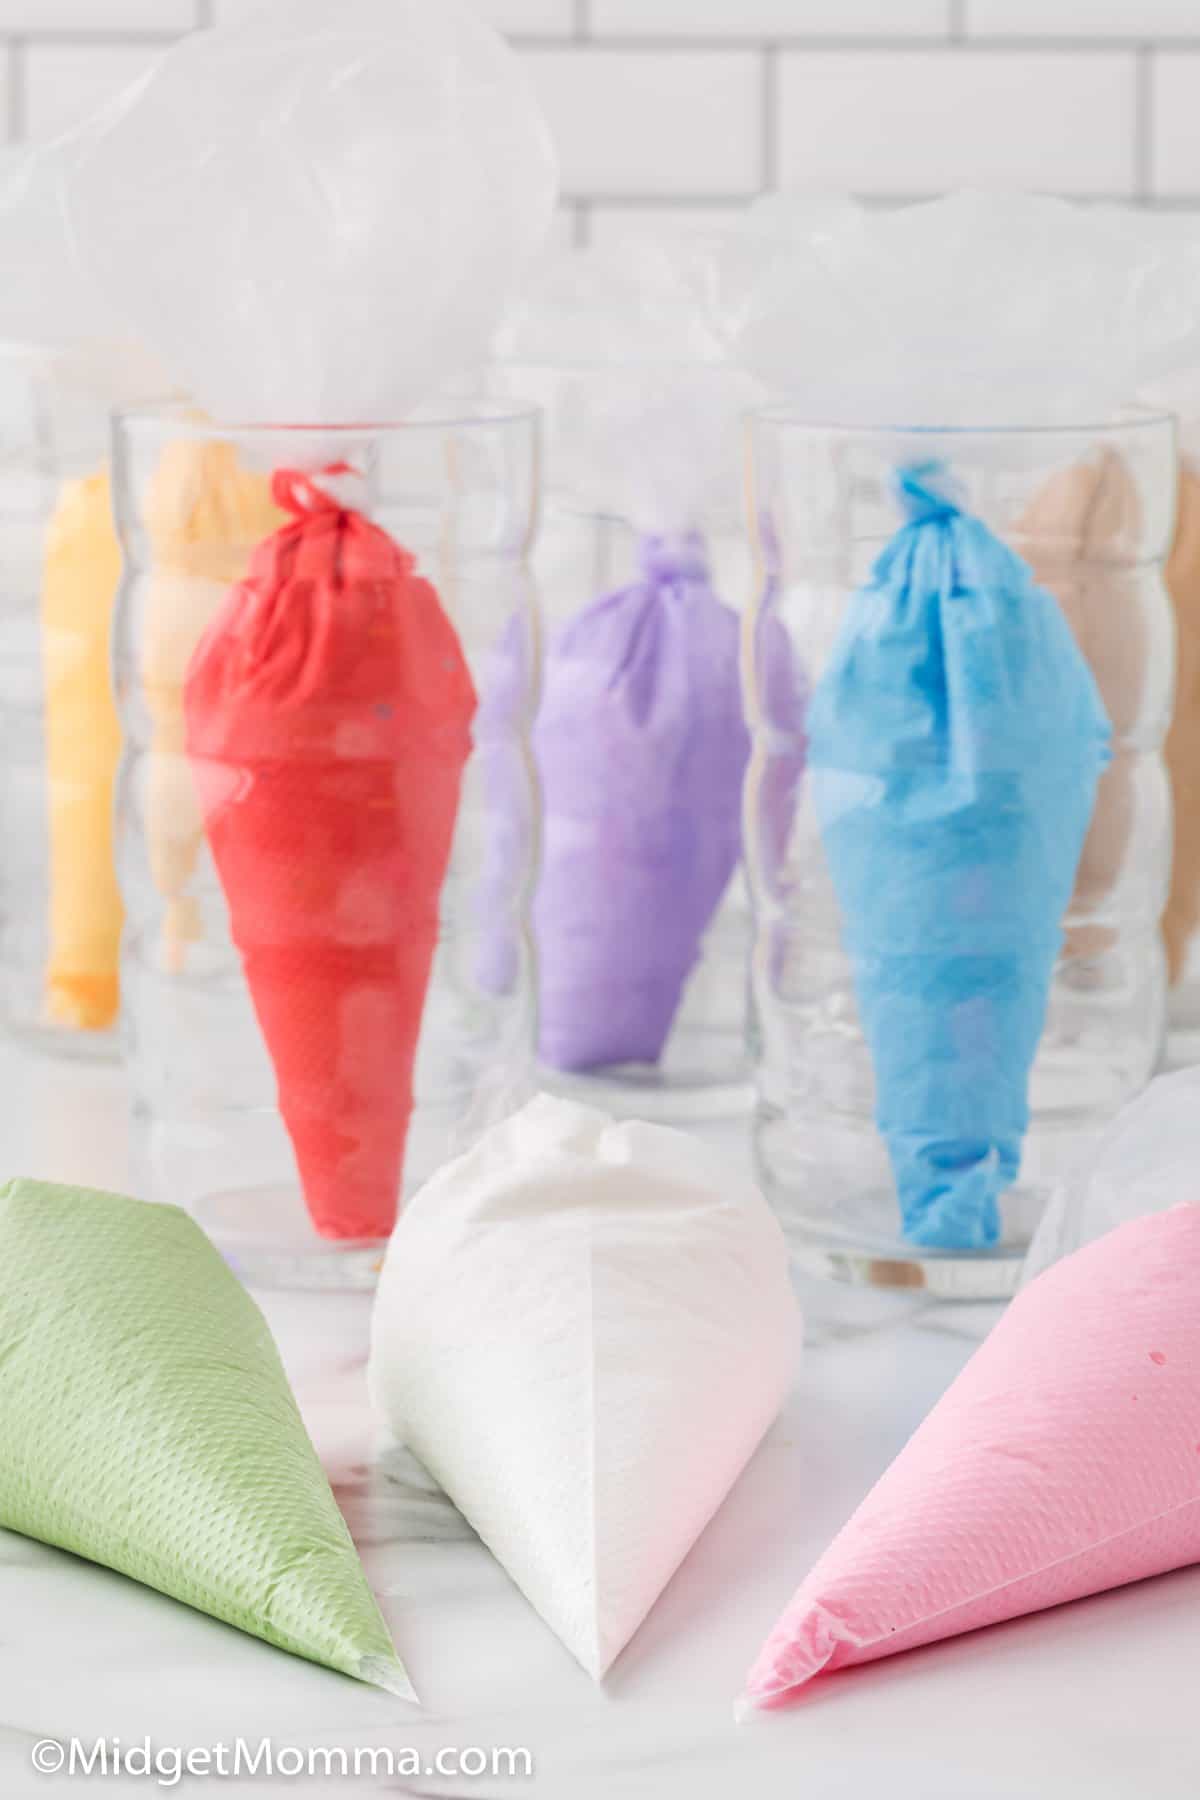 Piping bags filled with  a homemade Royal Icing recipe